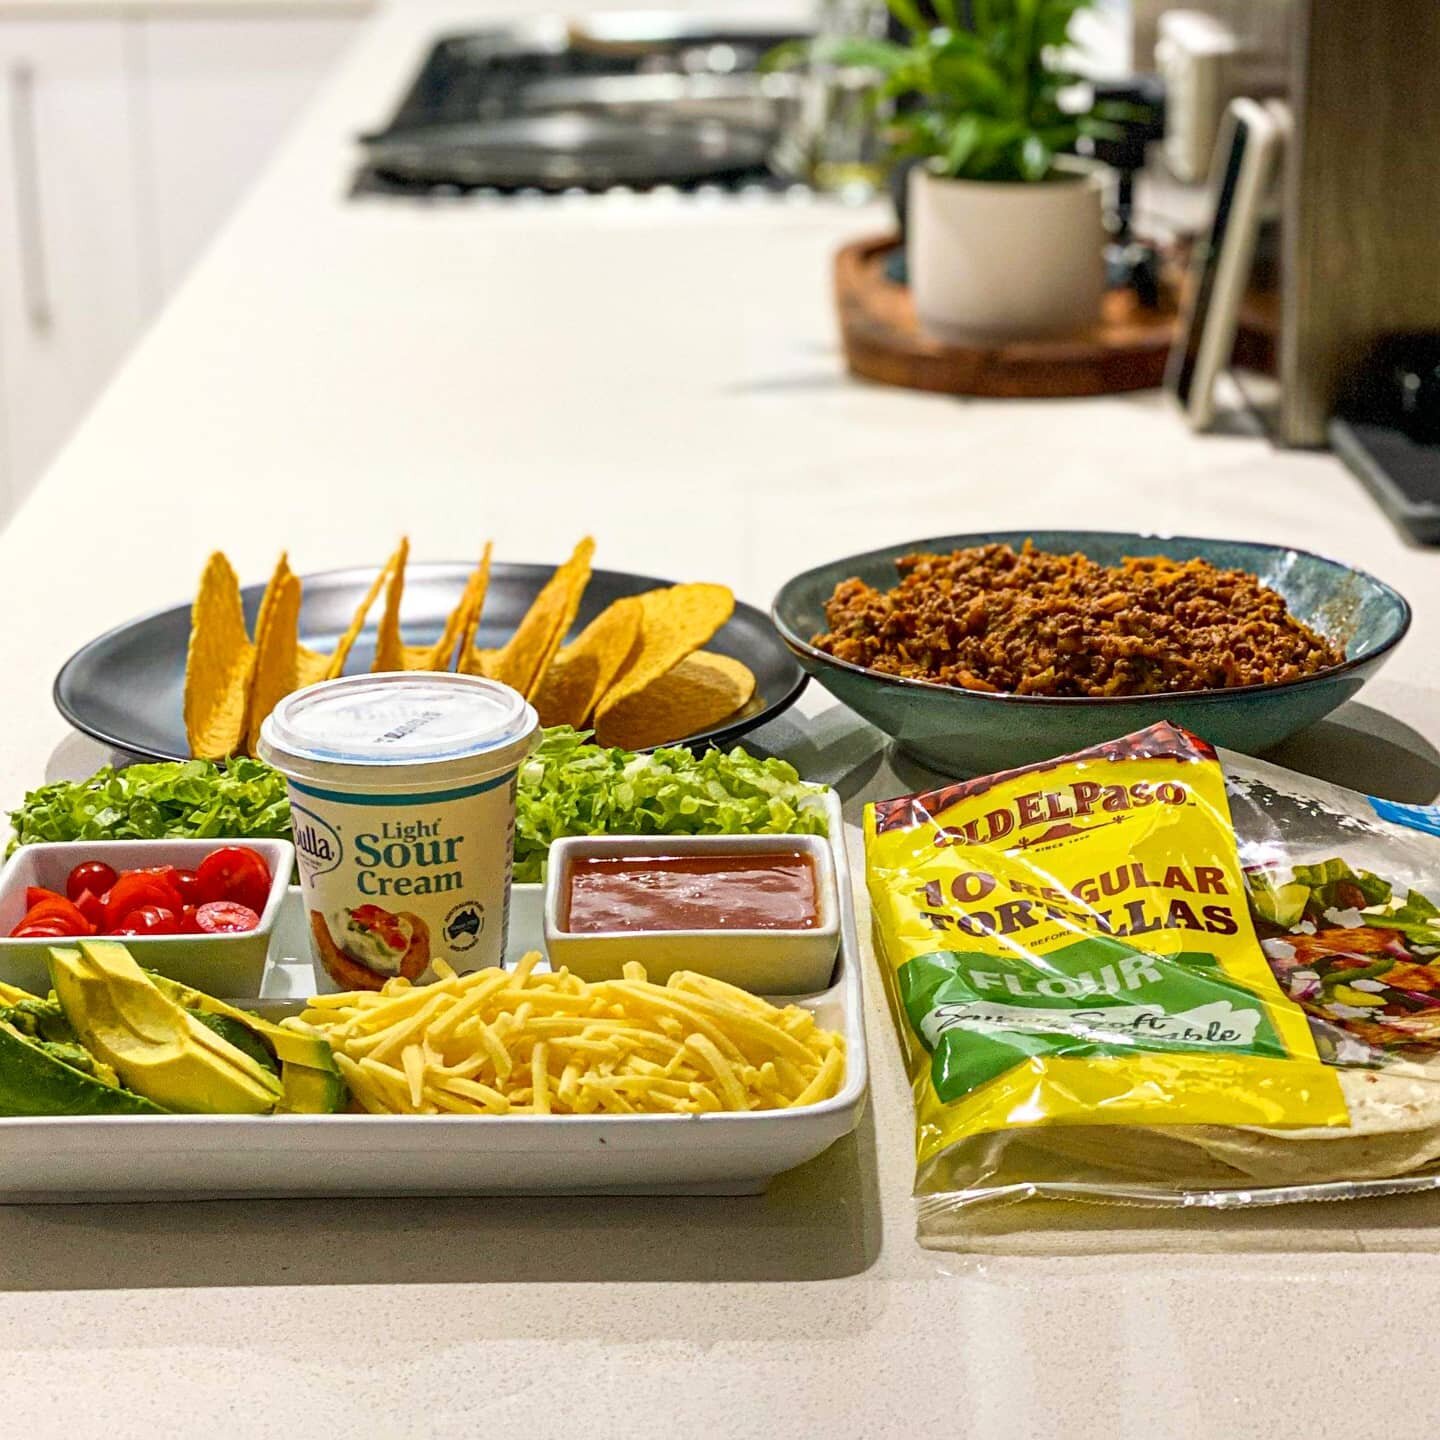 Easy weeknight meal! 🙌

Are you struggling for variety when it comes to dinner? 

Tacos are a great way to have a healthy, delicious AND quick meal - choose your choice of protein (e.g mince, shredded chicken or tofu for a vego option), add some sal